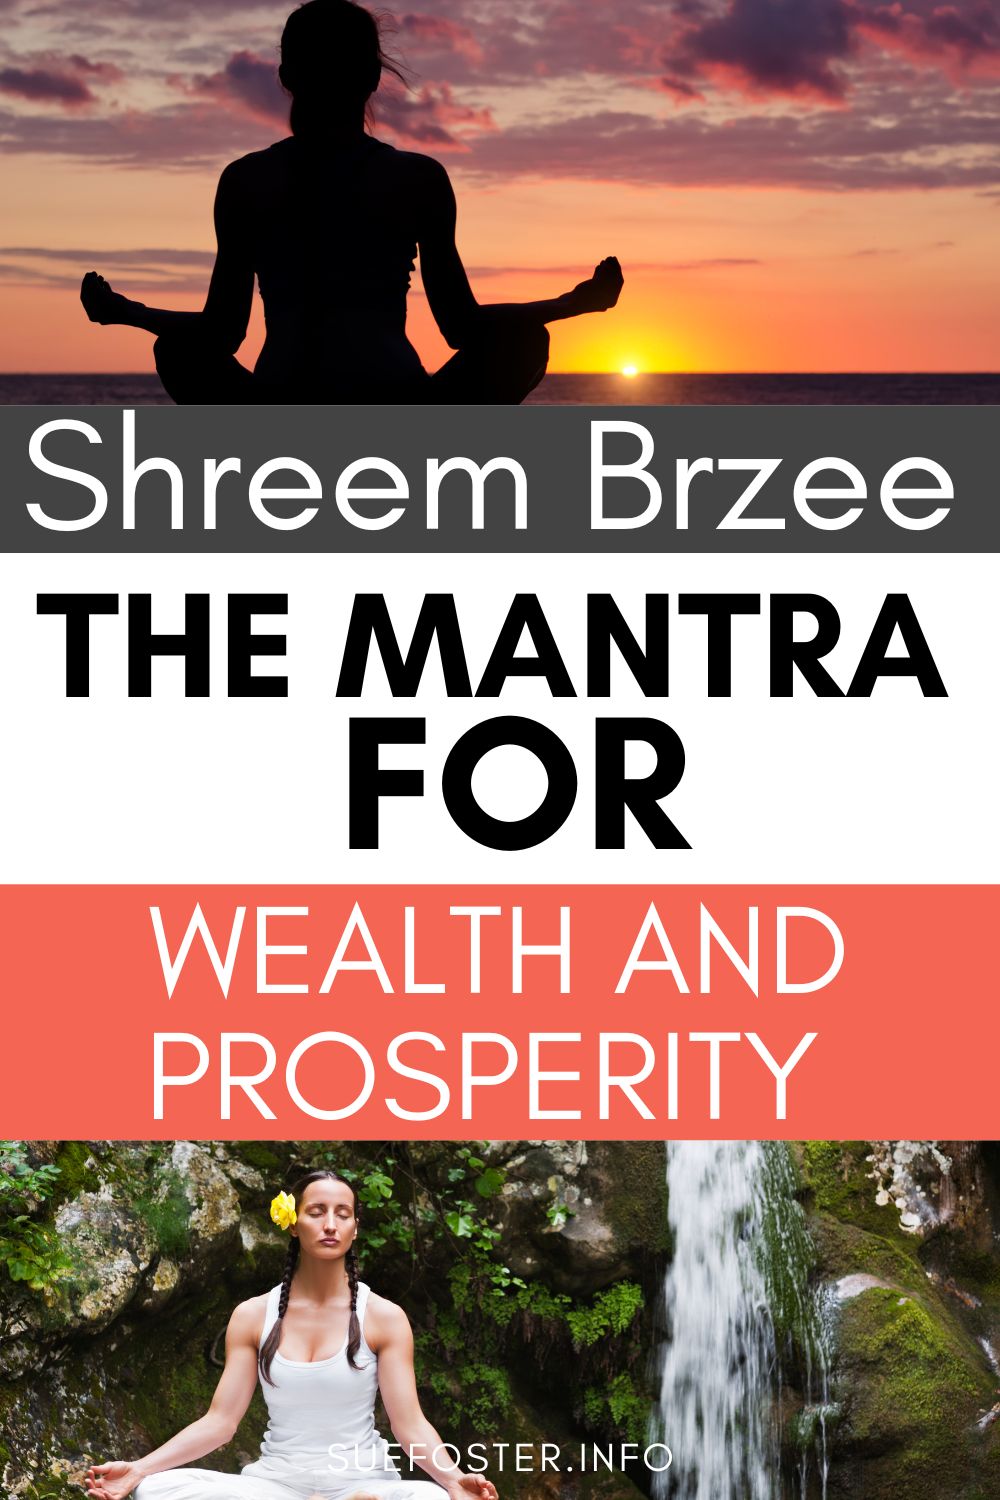 Shreem Brzee the mantra for wealth and abundance. Learn its origins, chanting techniques, and cultural impact.